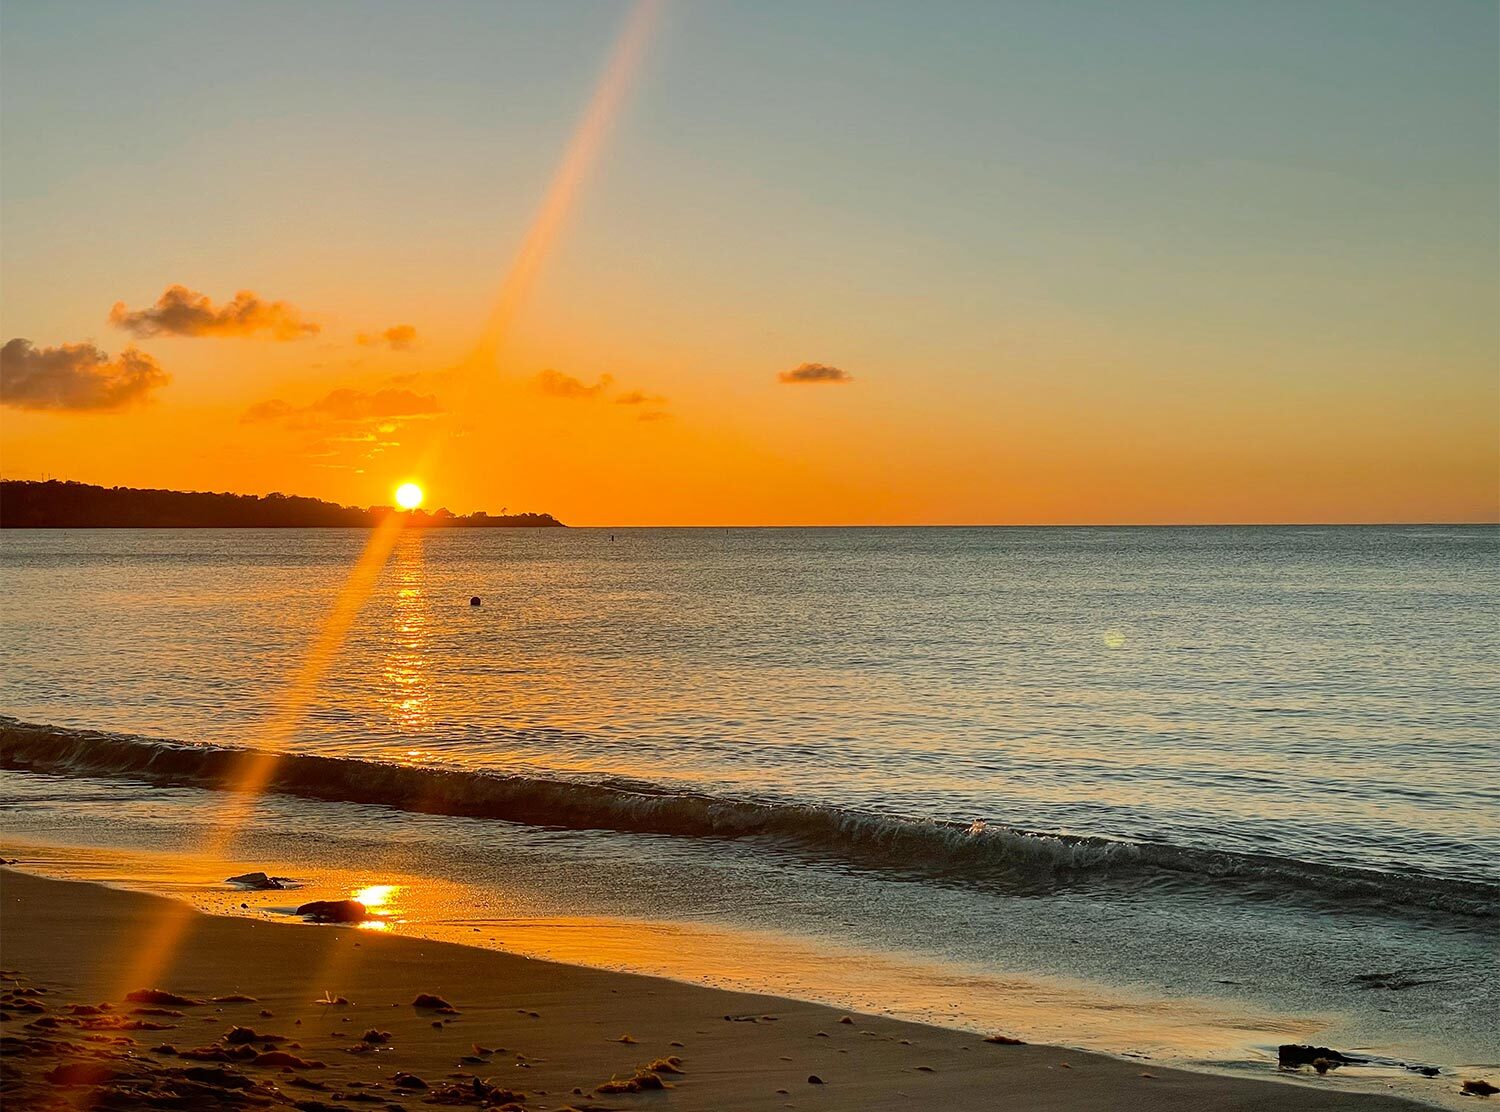 Silversands Grenada Sunsets are best viewed from the local beach bars with a rum punch or two